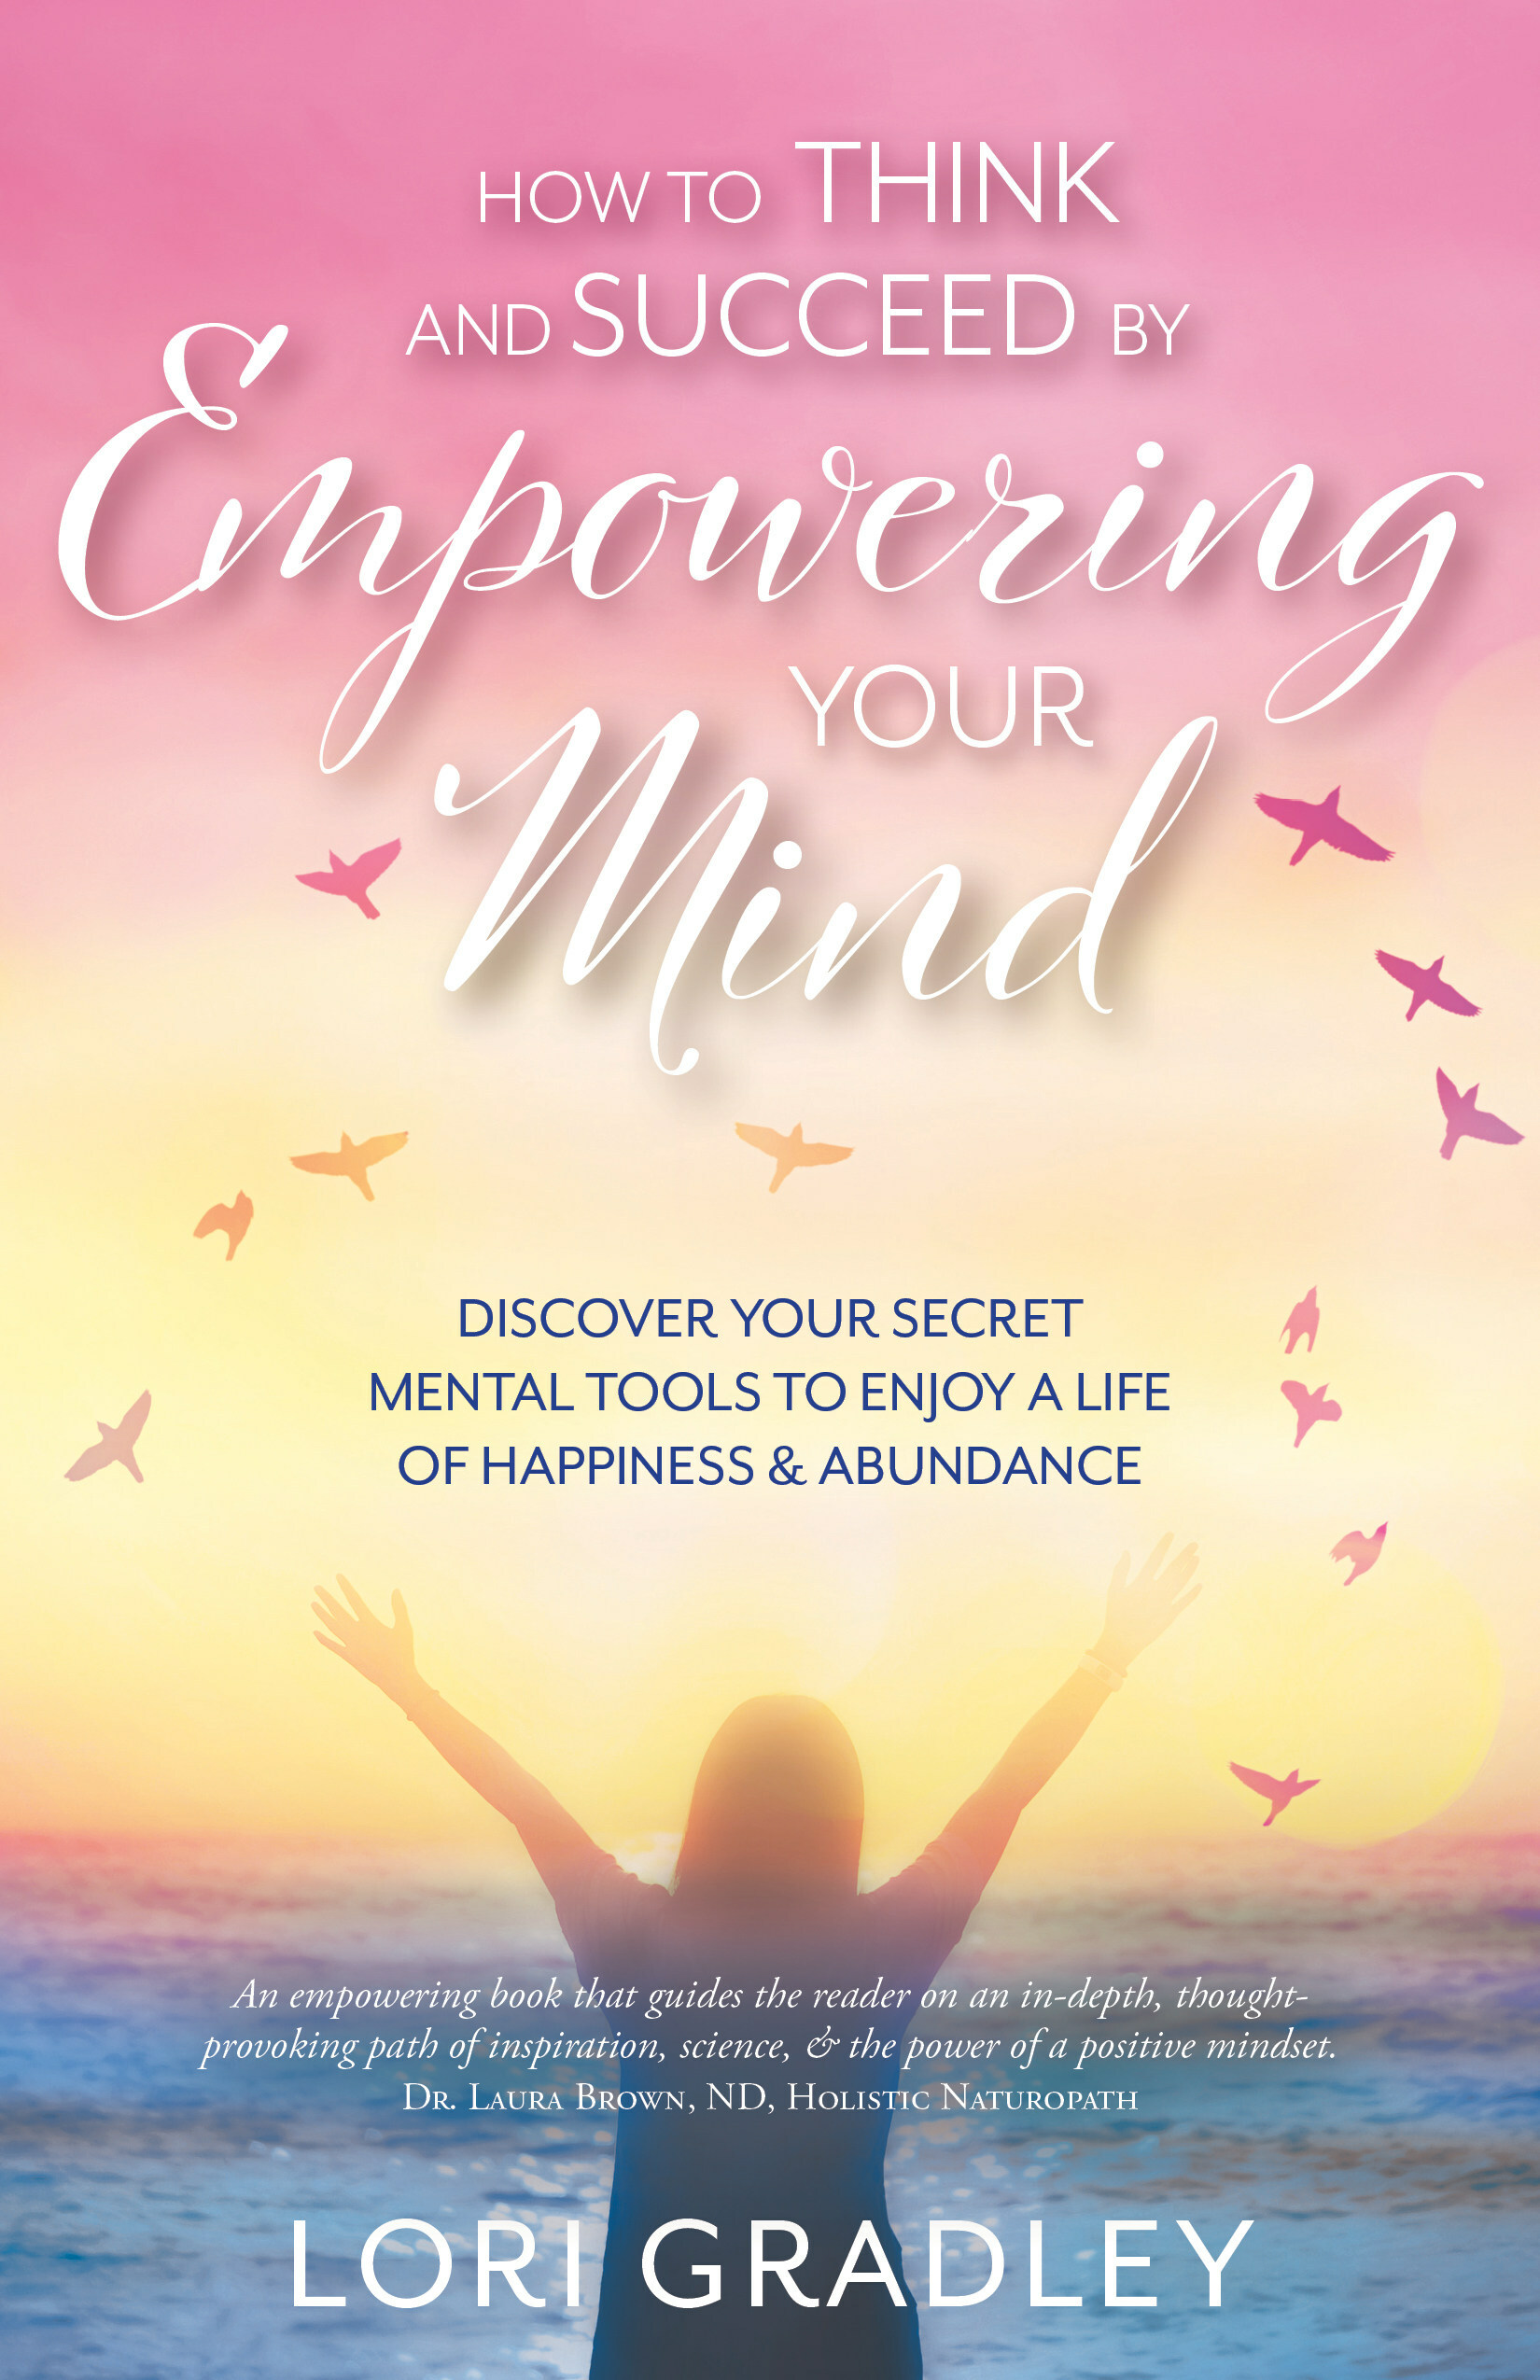 Discover Your Inner Strengths: Author, Lori Gradley Unveils an Empowering New Wellness Book That Guides Readers on A Journey of Self Discovery